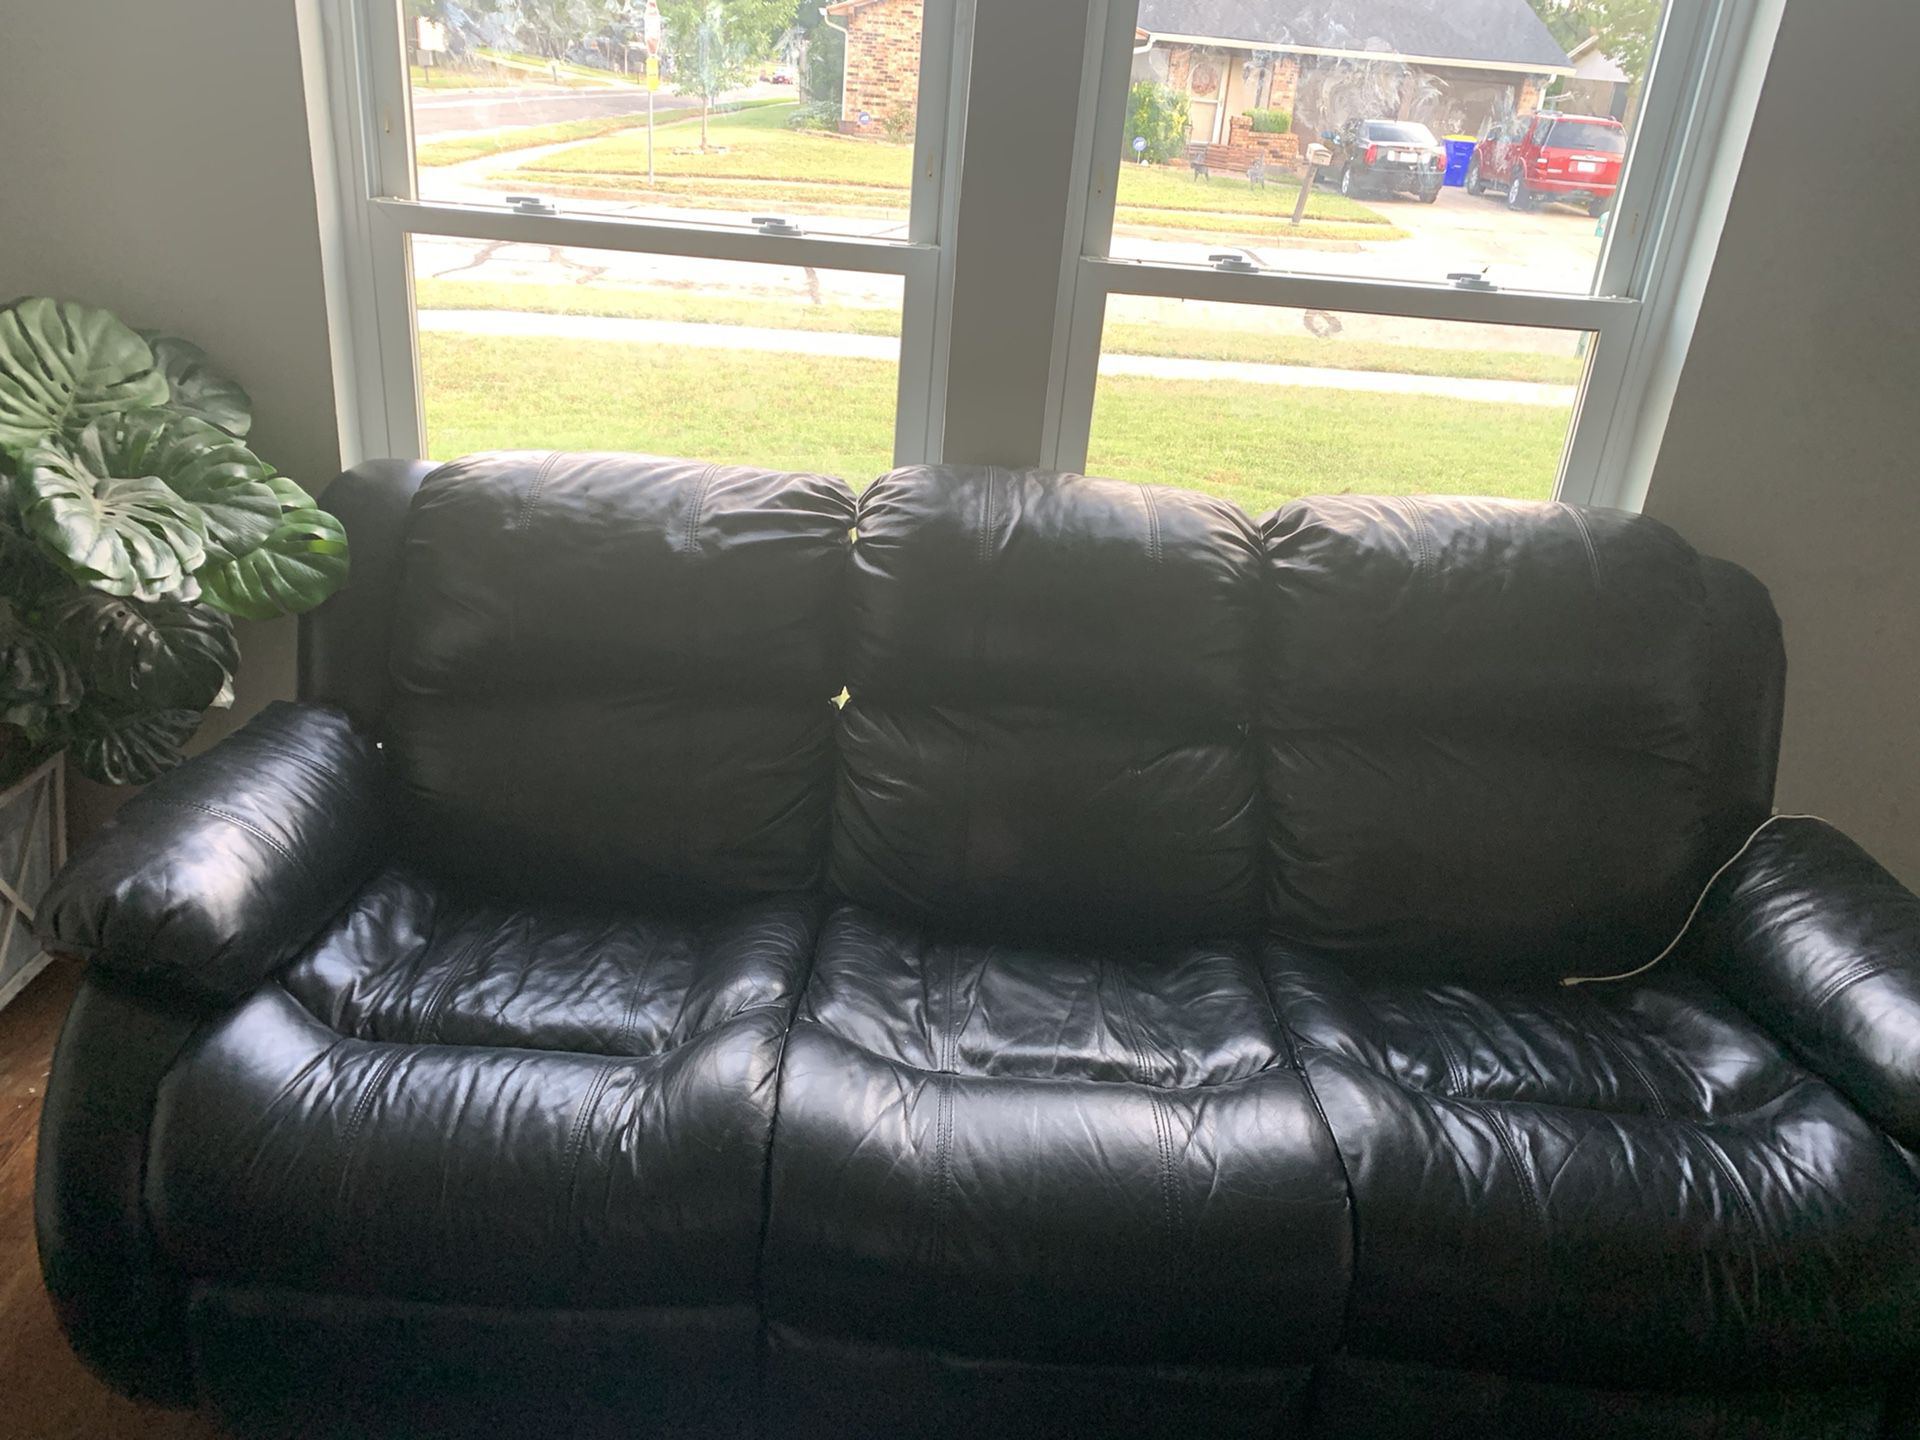  Black leather couch and loveseat 